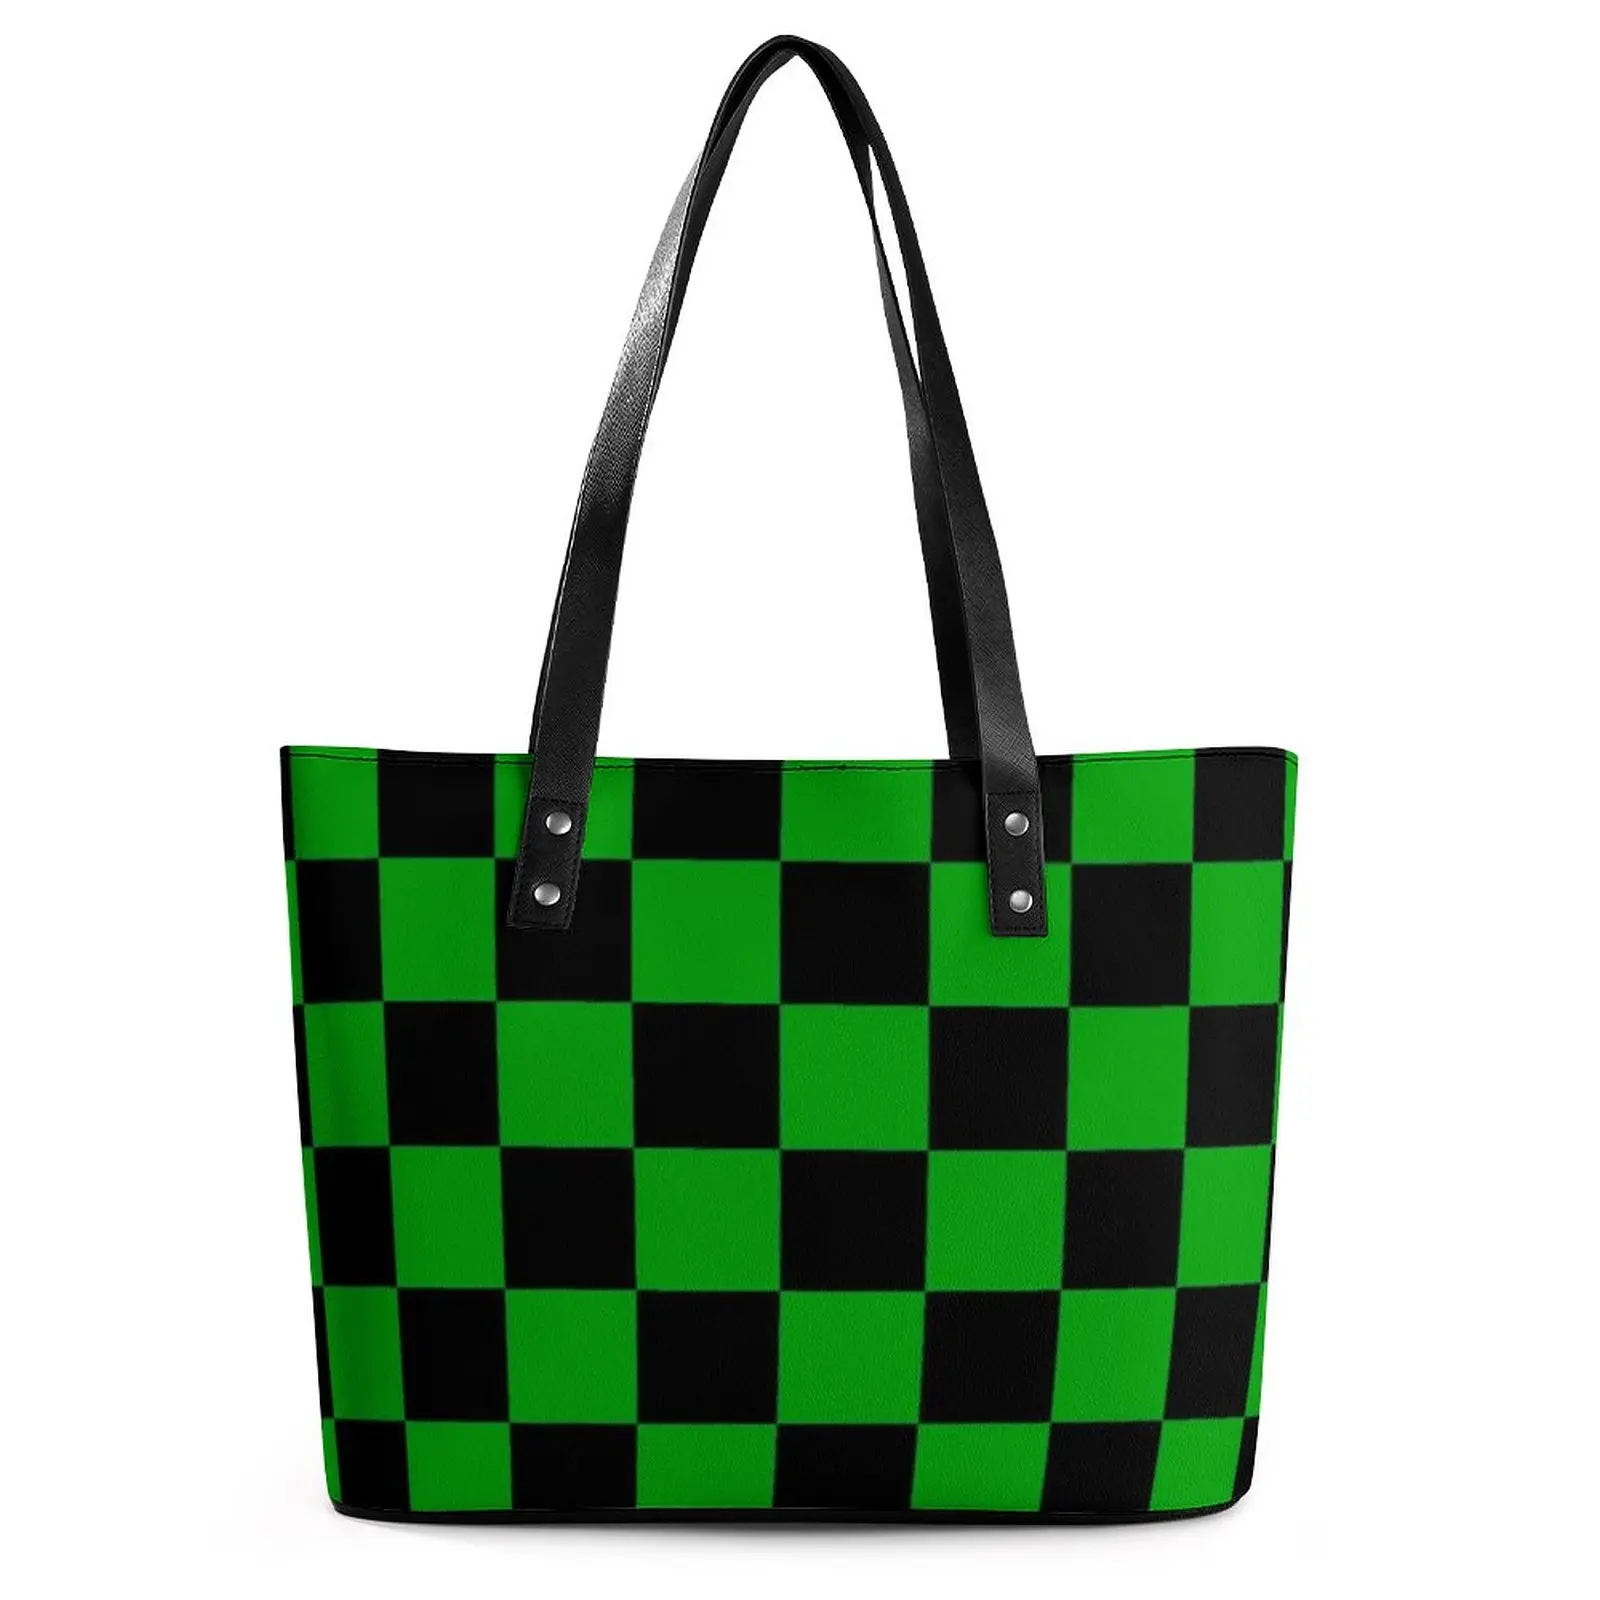 

Black And Green Two Tone Handbags Mod Checker Aesthetic Shoulder Bag School PU Leather Tote Bag Lady Graphic Design Shopper Bags